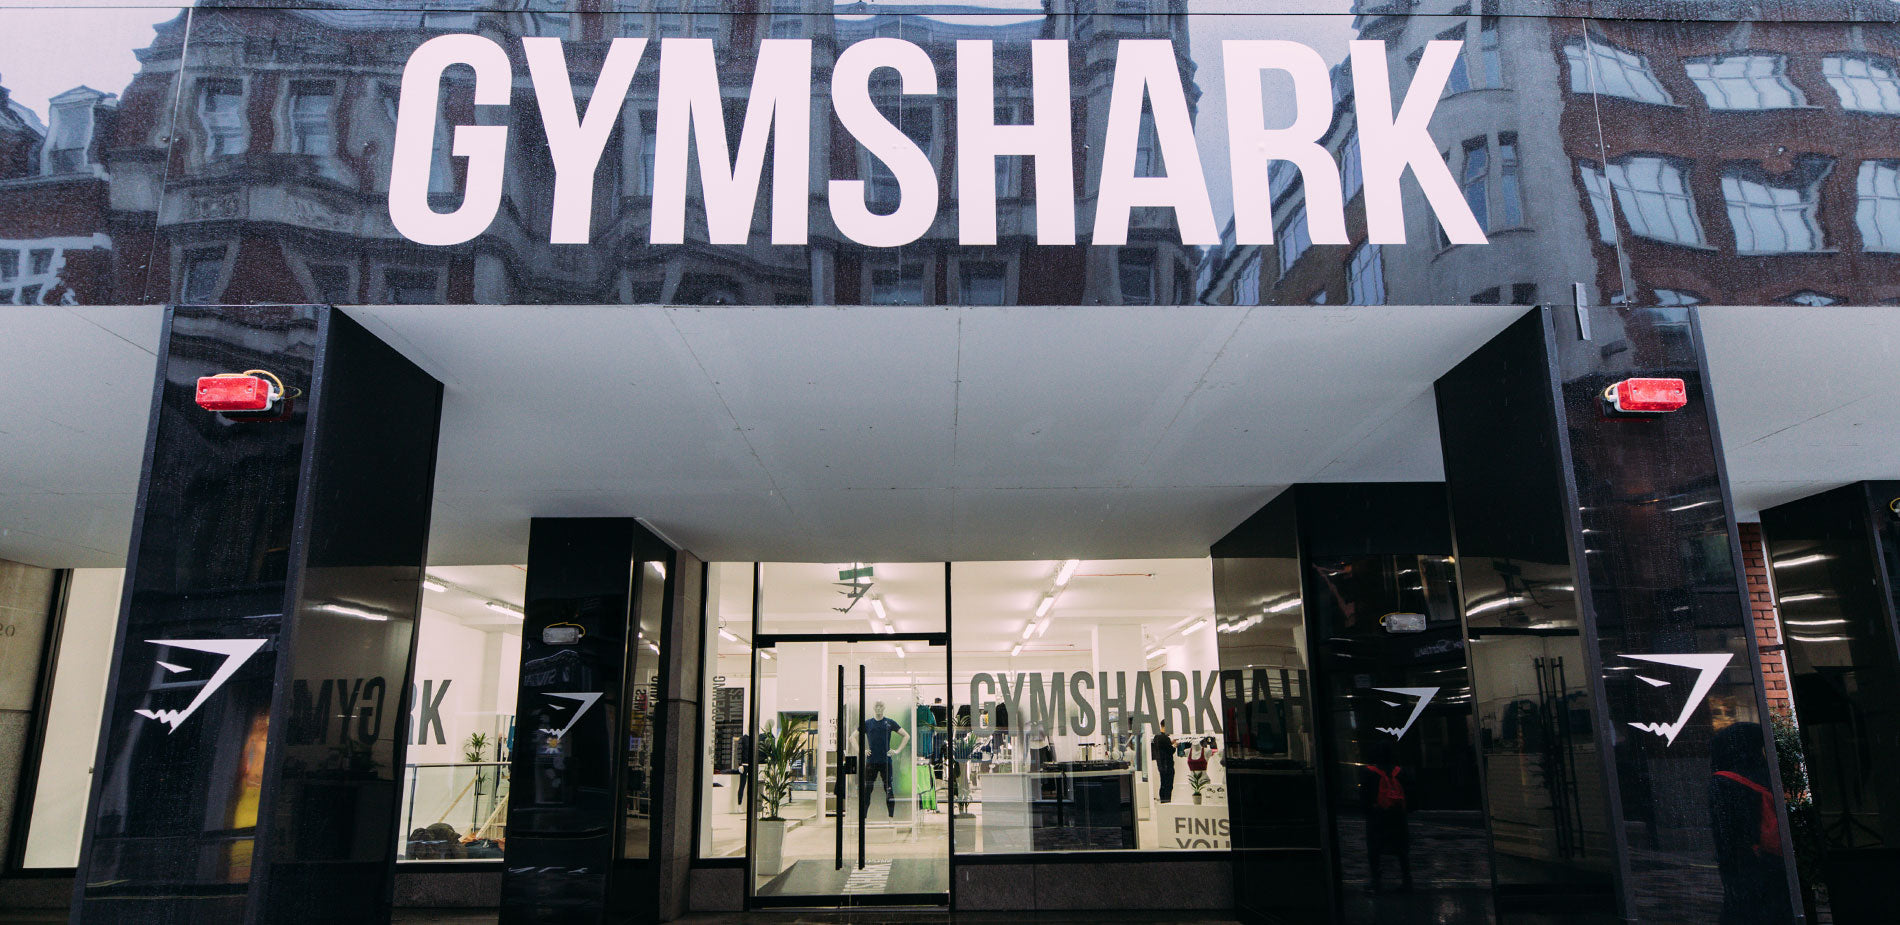 Gymshark's London pop-up store lasted only two weeks before COVID-19 shut it down